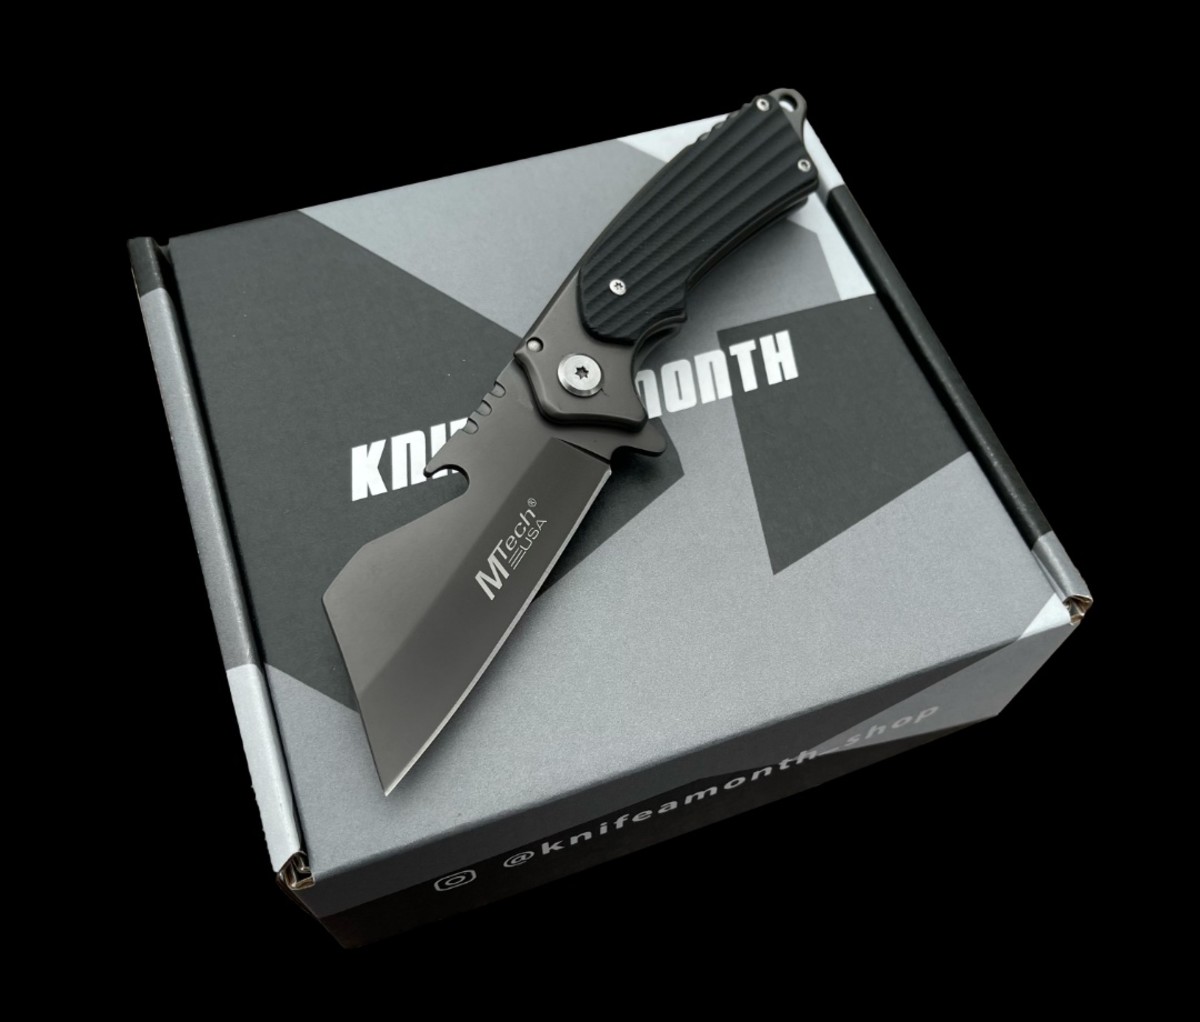 Knife-A-Month